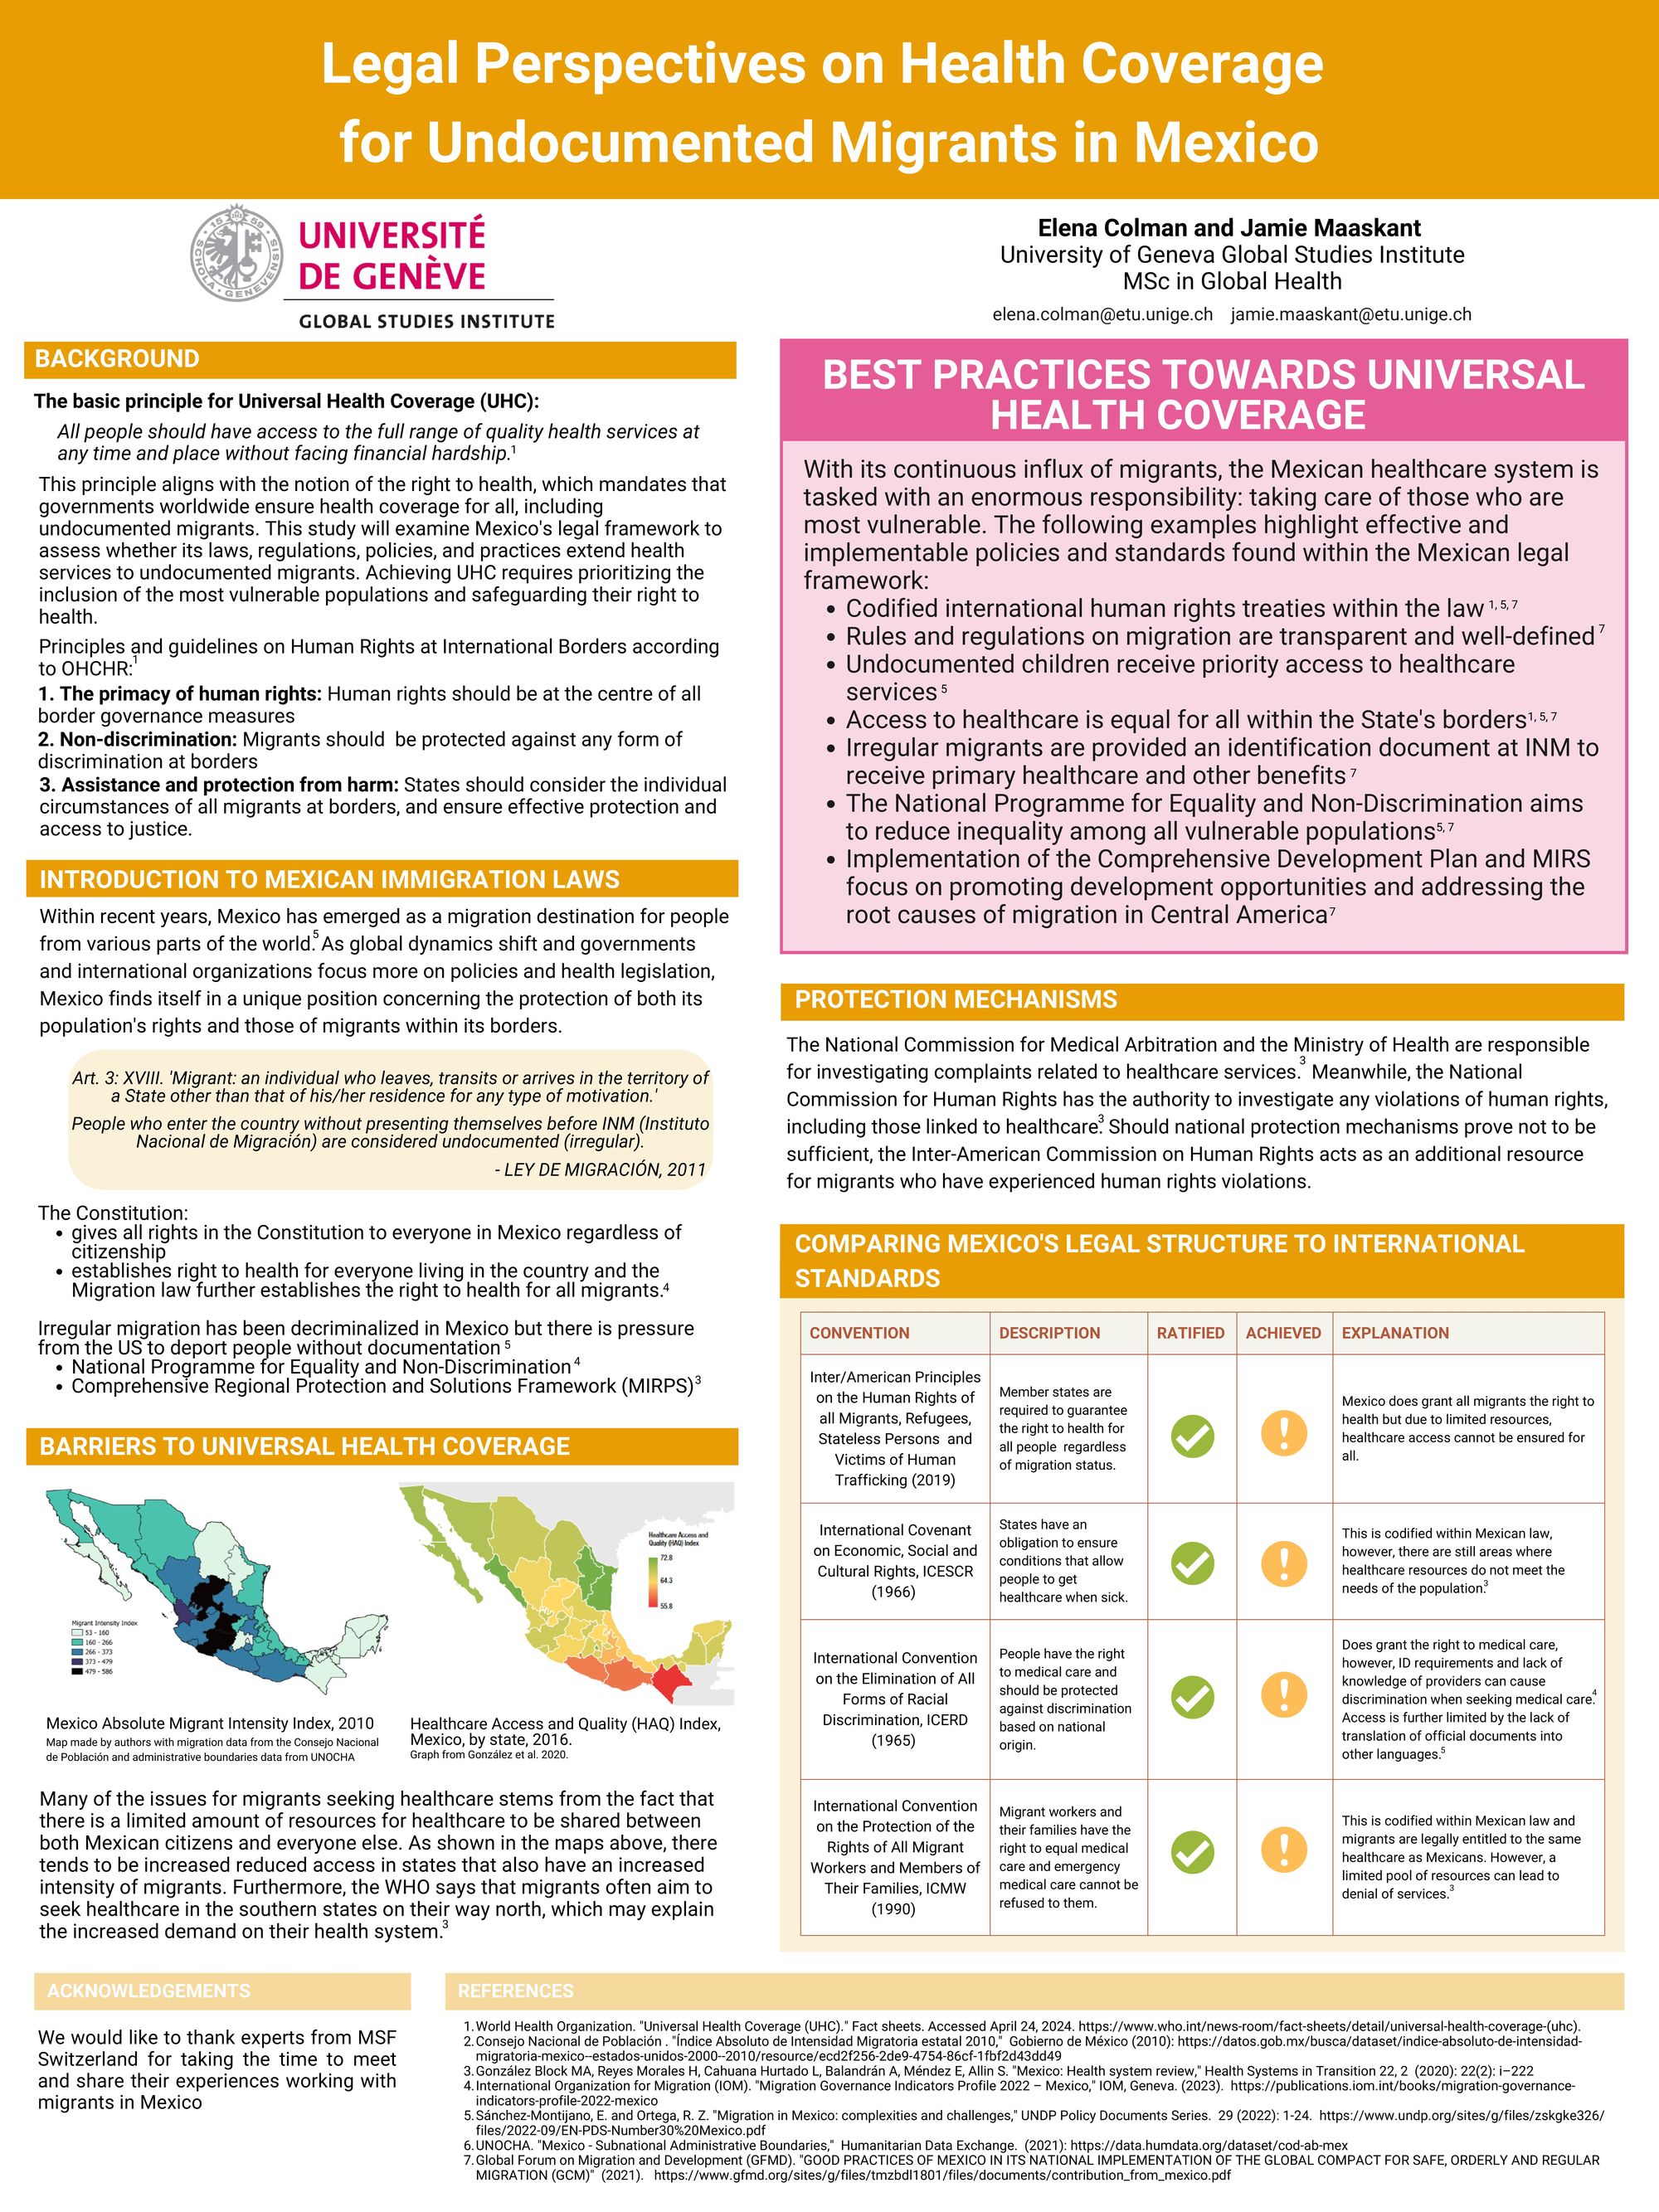 Legal Perspectives on Health Coverage  for Undocumented Migrants in Mexico